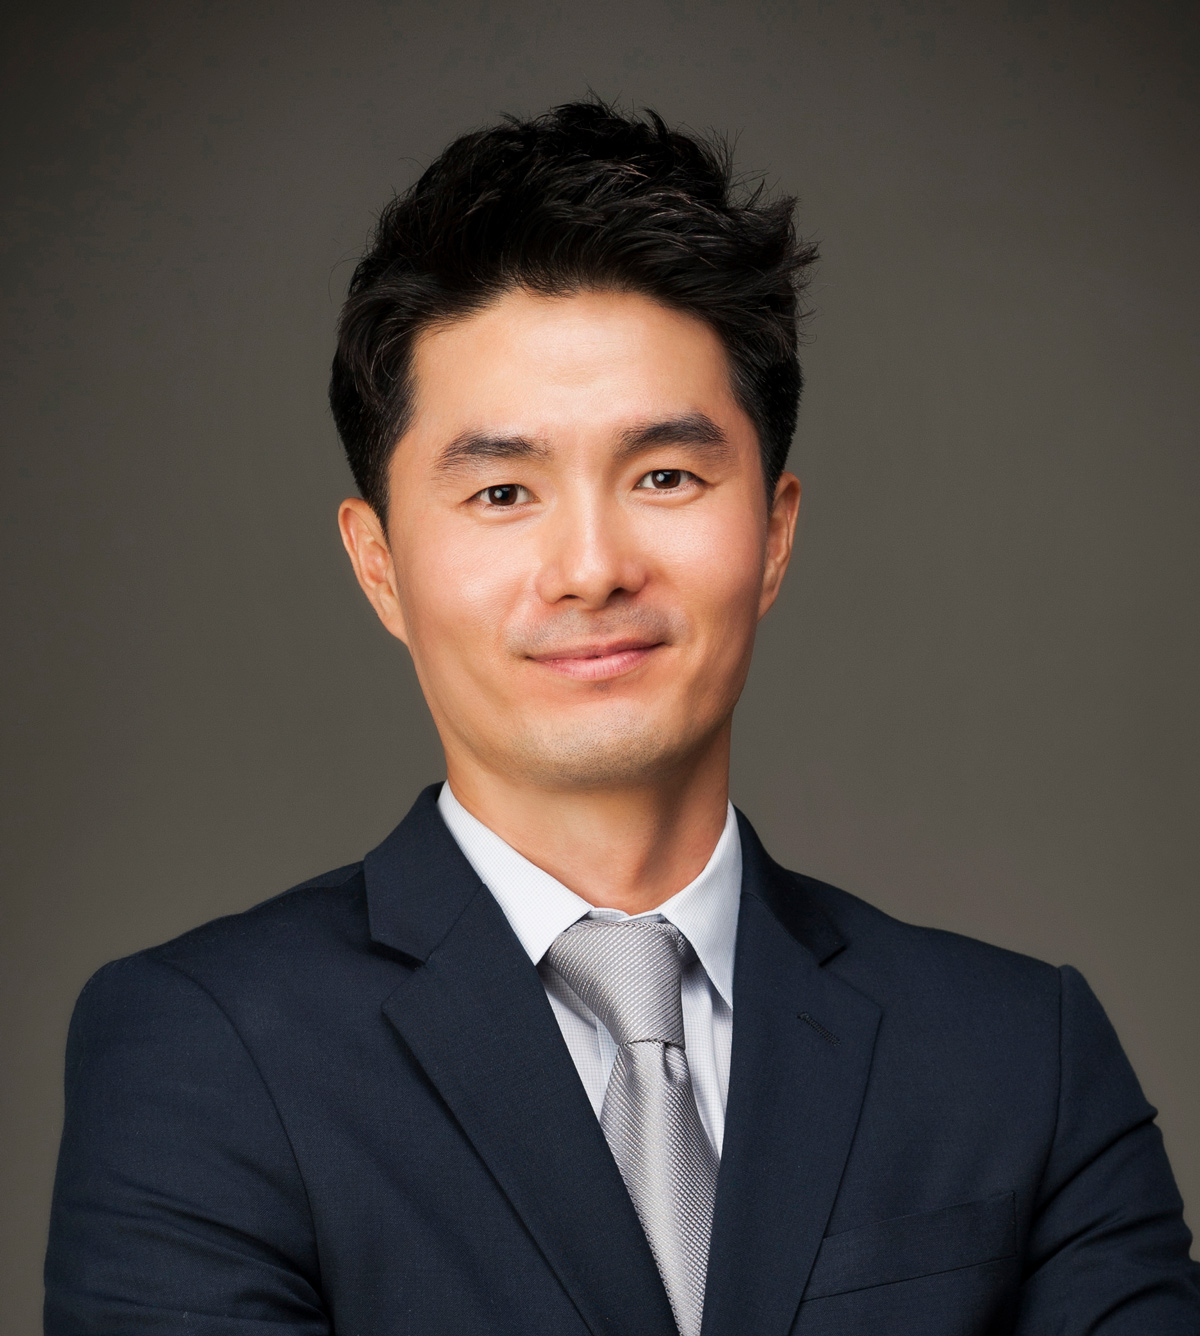 Dr. Joshua Lee joins the Buford Office of Ankle & Foot Centers of Georgia!